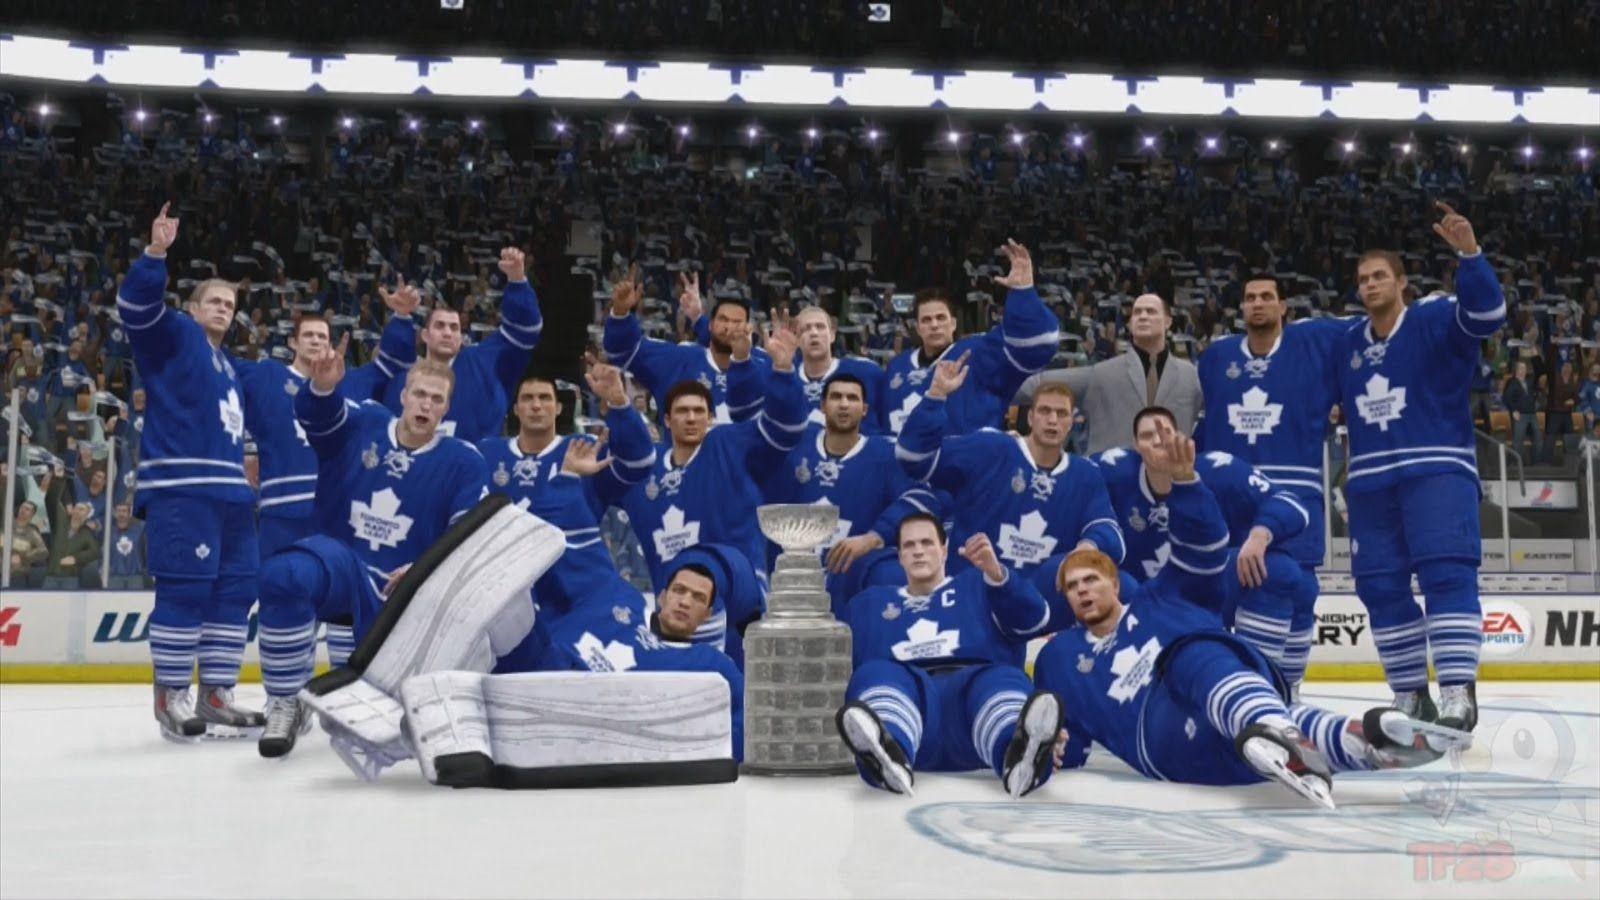 NHL 14 Maple Leafs Stanley Cup Championship Celebration